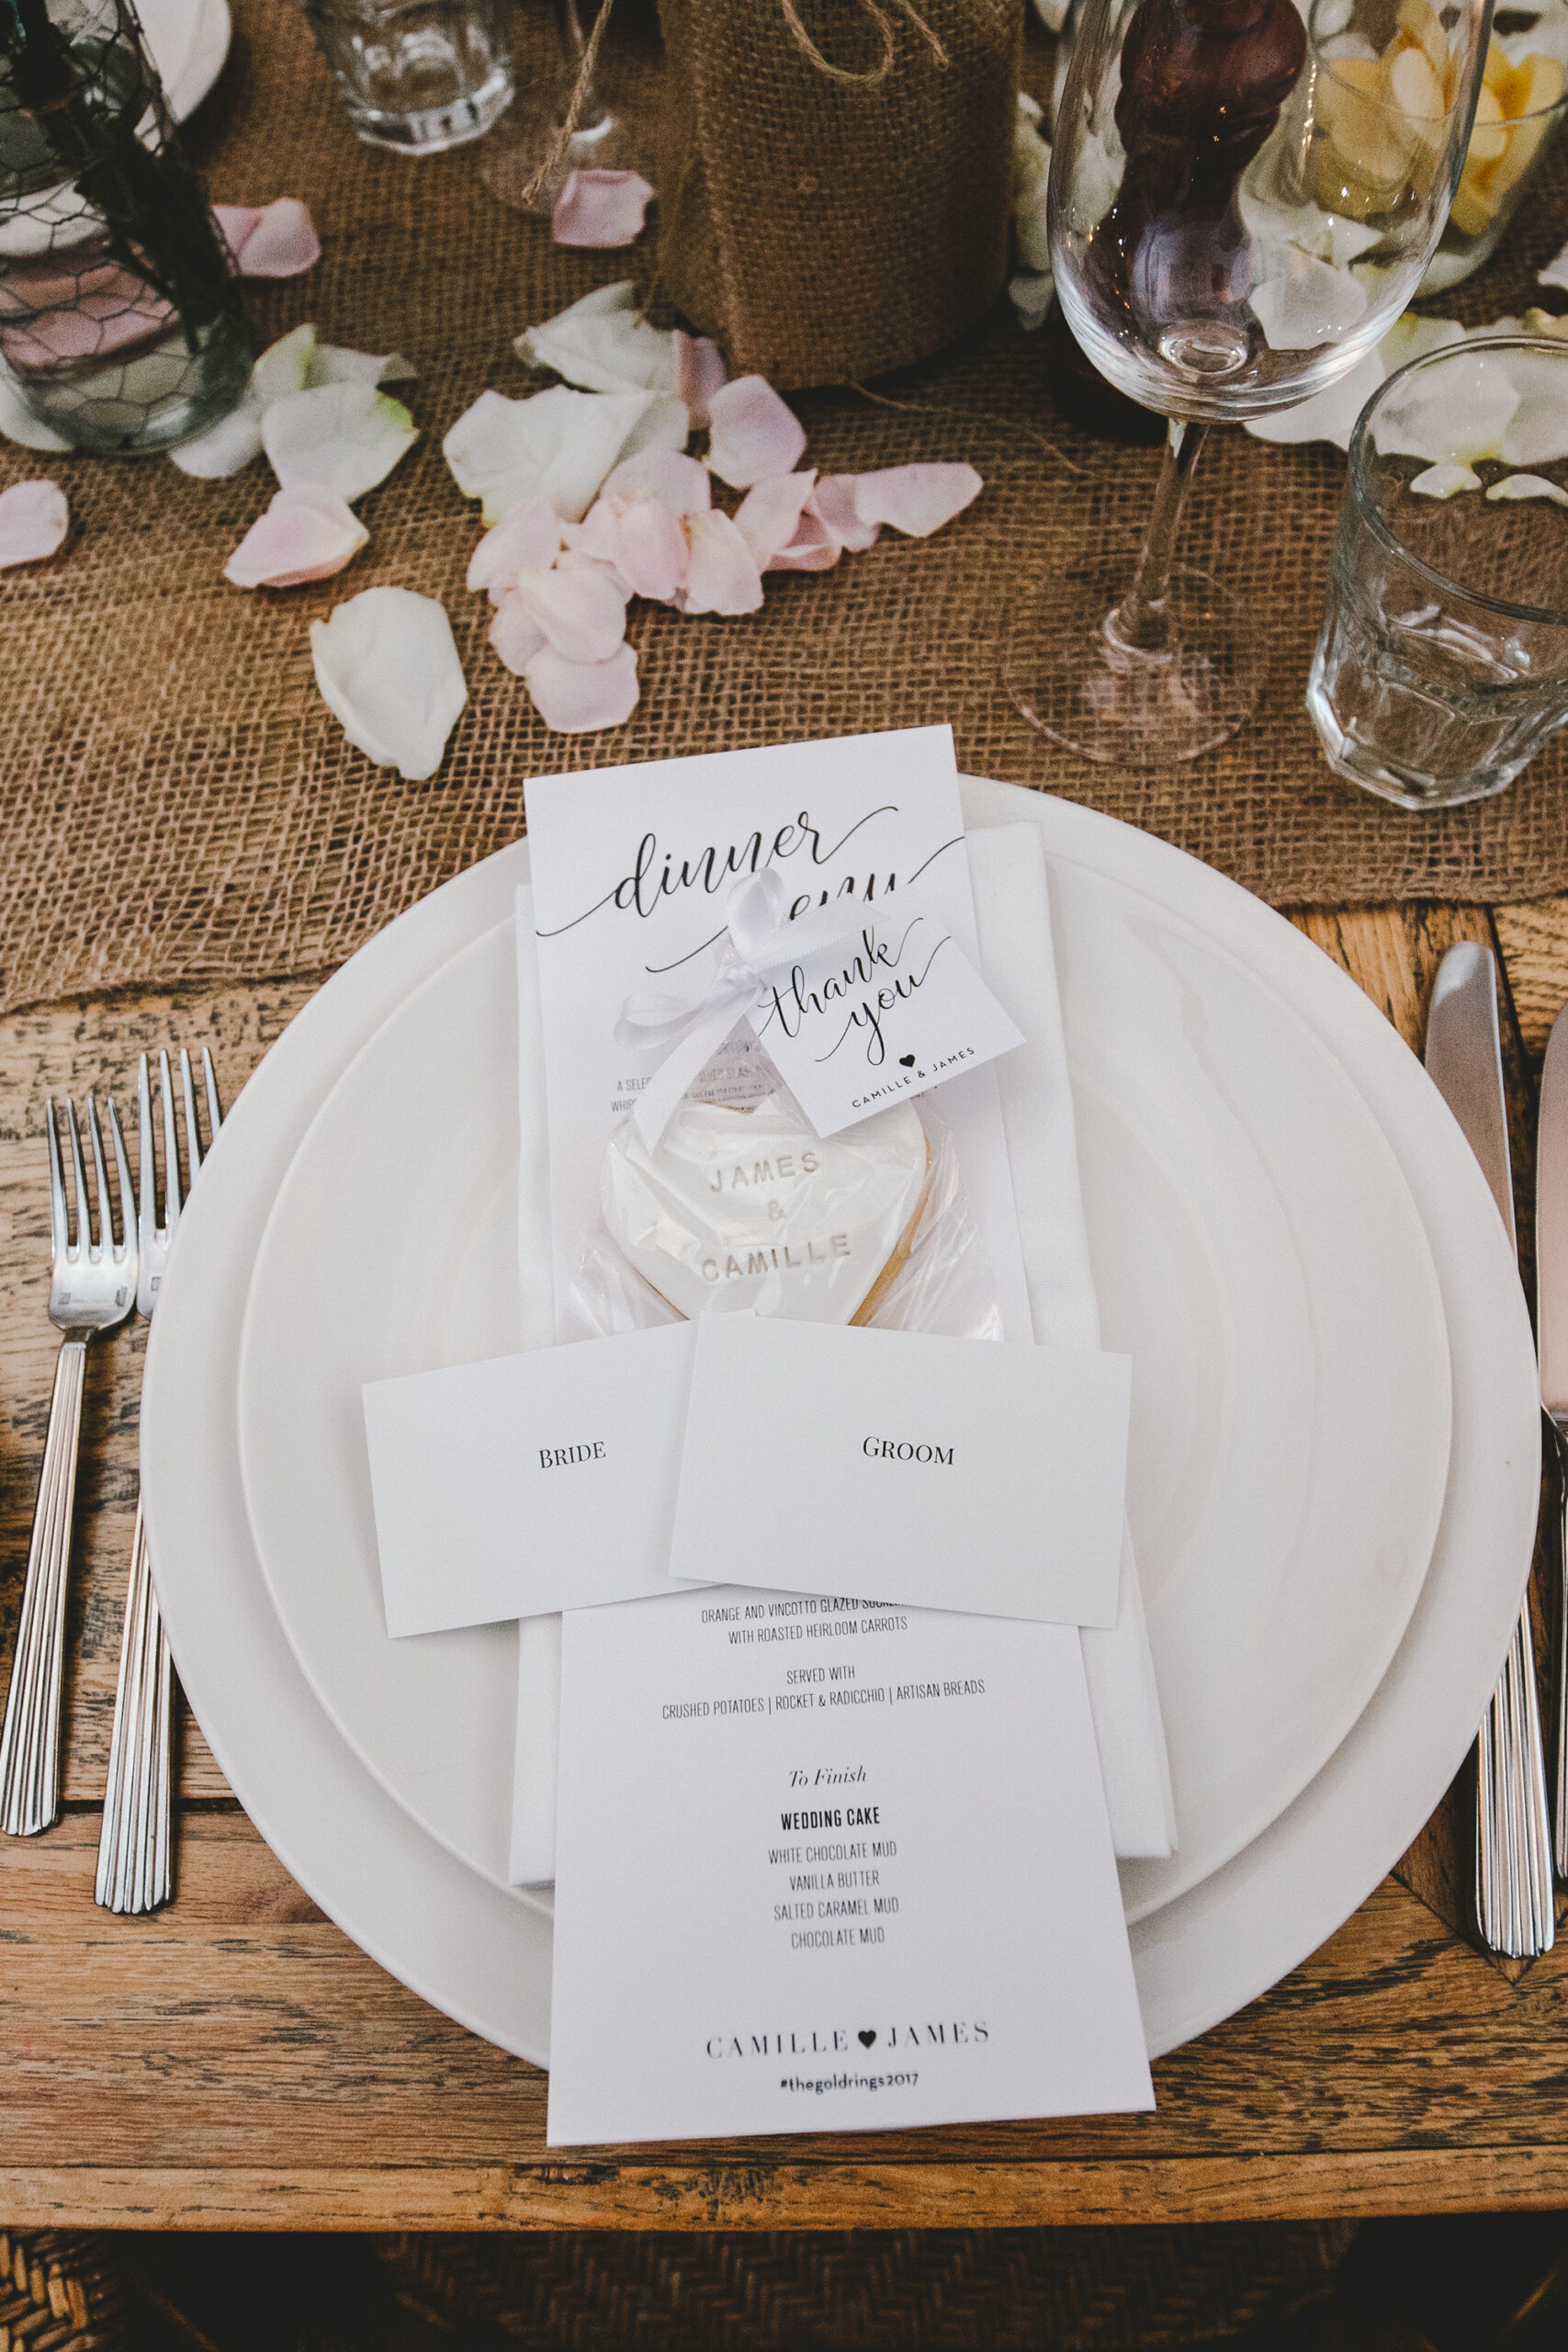 Camille_James_Rustic-Glam-Wedding_Pure-Image-Photography_SBS_027